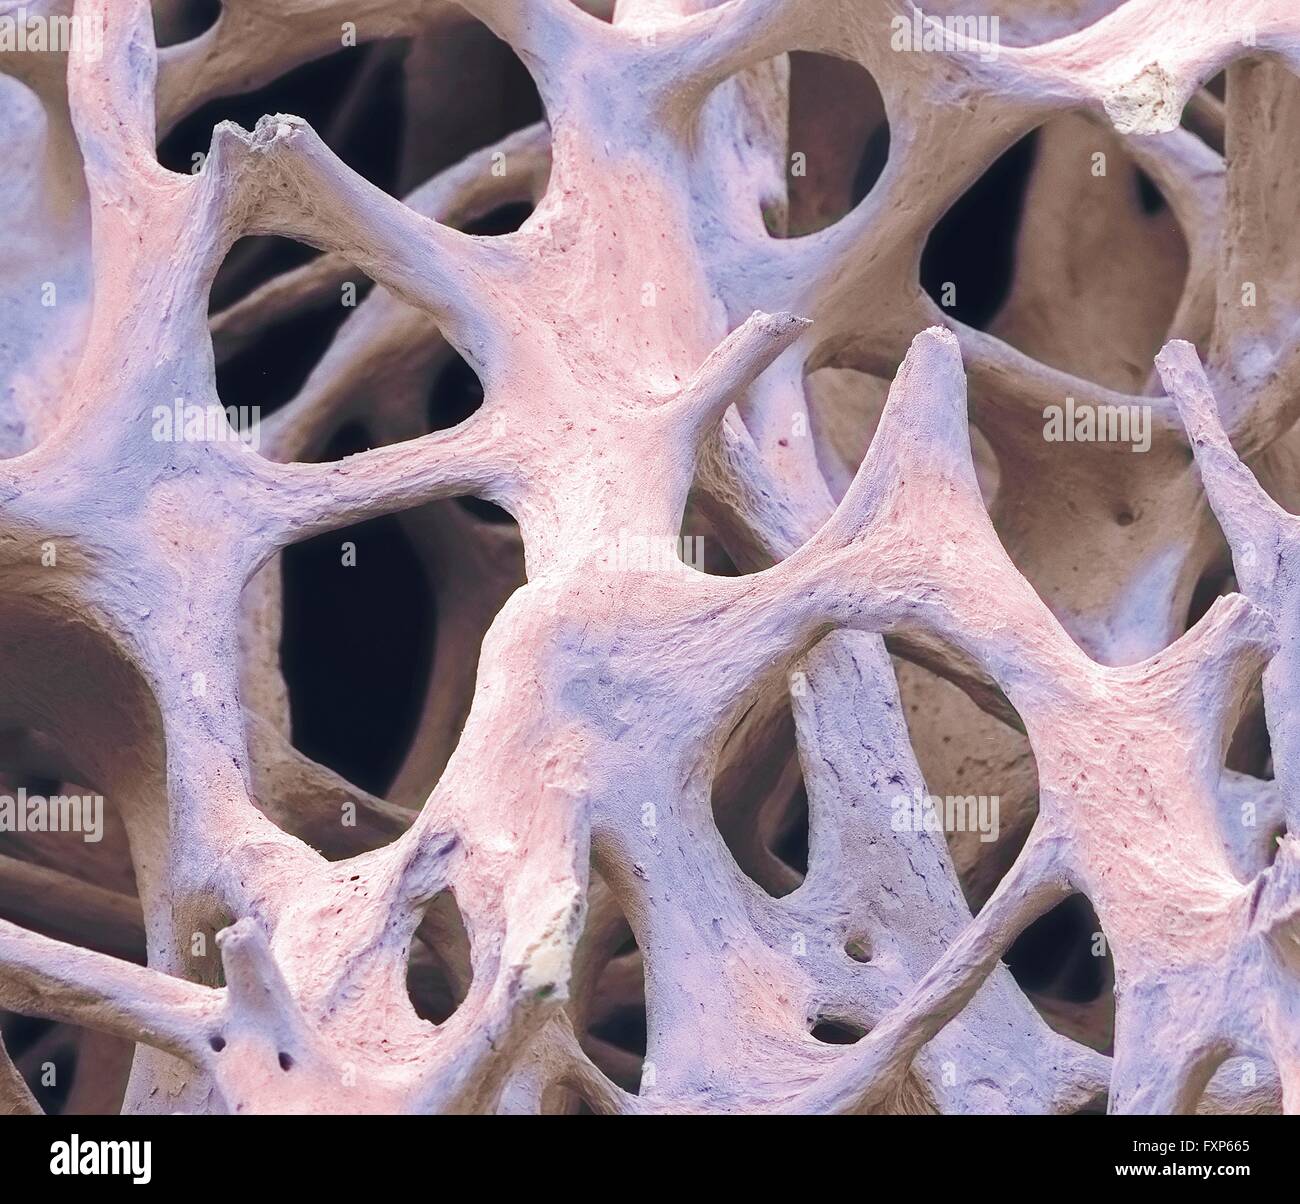 Bone tissue. Coloured scanning electron micrograph (SEM) of cancellous (spongy) bone. Bone tissue can be either cortical (compact) or cancellous. Cortical bone usually makes up the exterior of the bone, while cancellous bone is found in the interior. Cancellous bone is characterised by a honeycomb arrangement, comprising a network of trabeculae (rod-shaped tissue). These structures provide support and strength to the bone. The spaces within this tissue contain bone marrow (not seen), a blood forming substance. Magnification: x40 when printed 10cm wide. Stock Photo